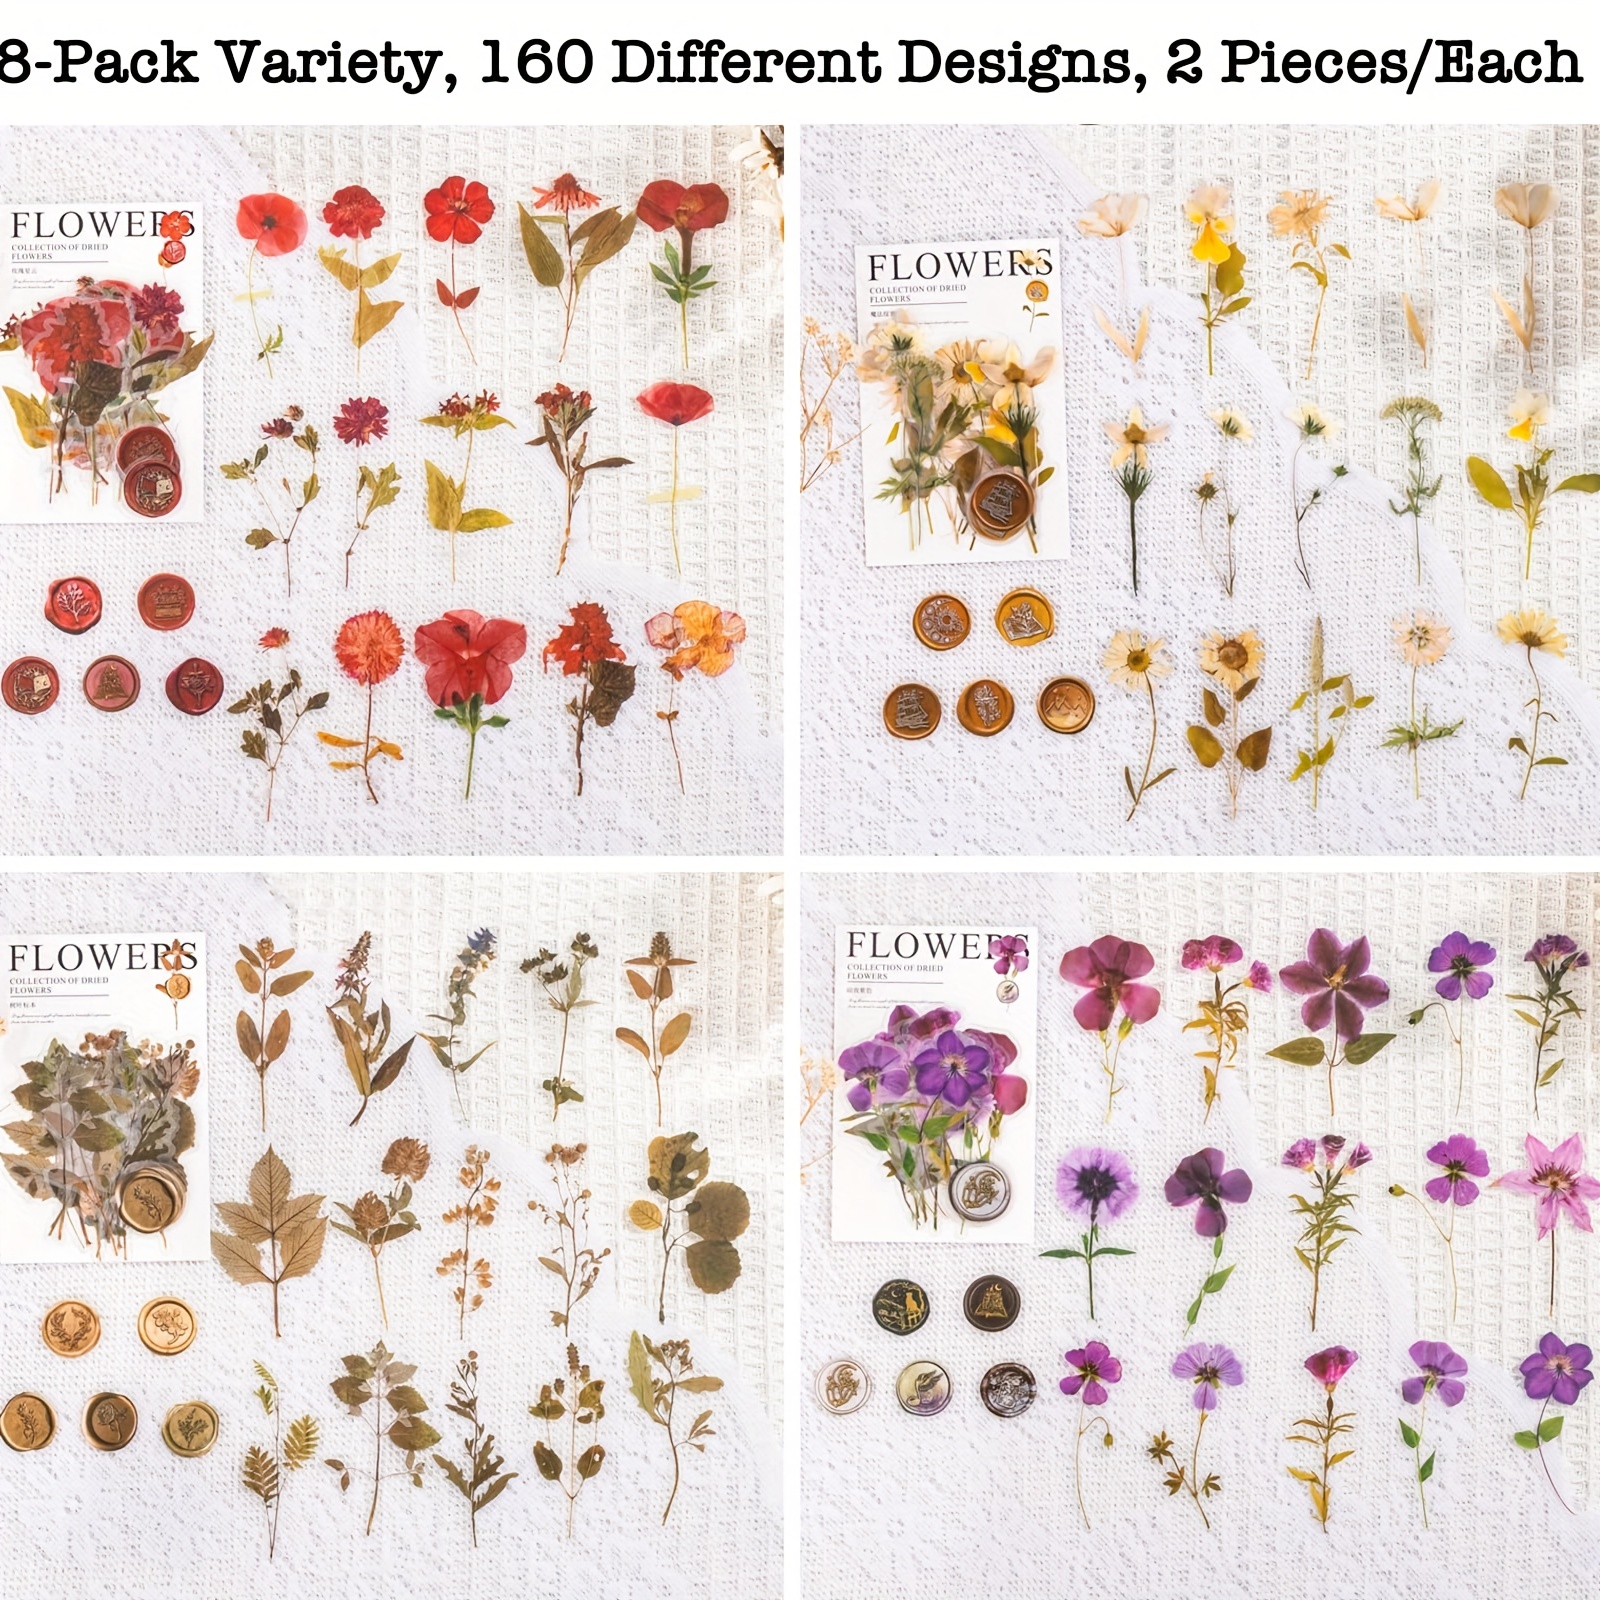 NESSCCI Pressed Flower Themed Stickers (Assorted 240 Pieces,12 Sheets)  Scrapbook Supplies,Stickers for Journaling,Dried Floral Resin